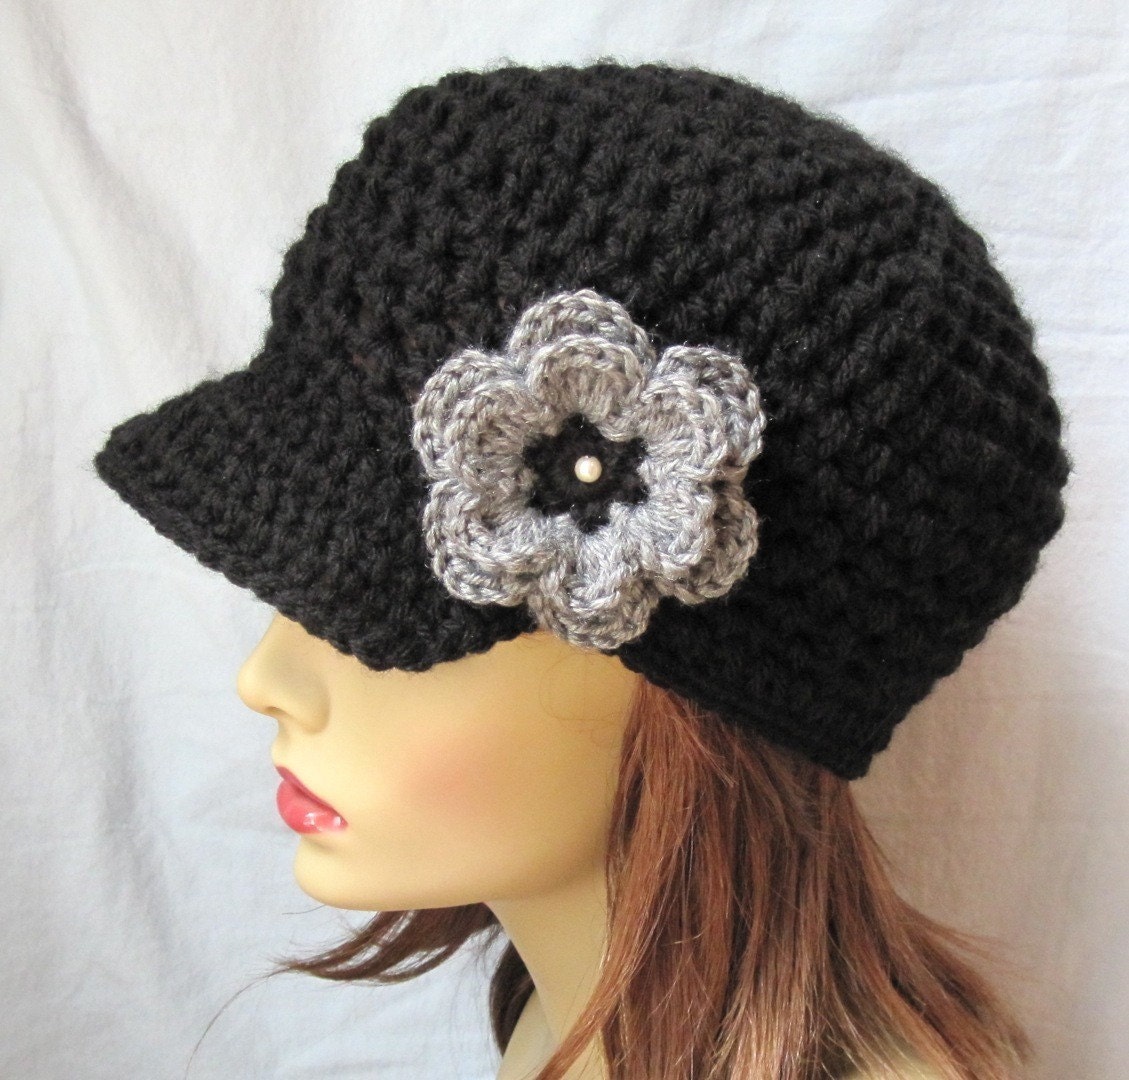 Womens Hat, Medium - Large Teen / Adult Newsboy, Black, Gray, Pearl, Removable Flower Pin Brooch, Jewelry, Wedding Gifts, Birthday Gifts, Photo Prop, Handmade by jadeexpressions on Etsy- JE148NML